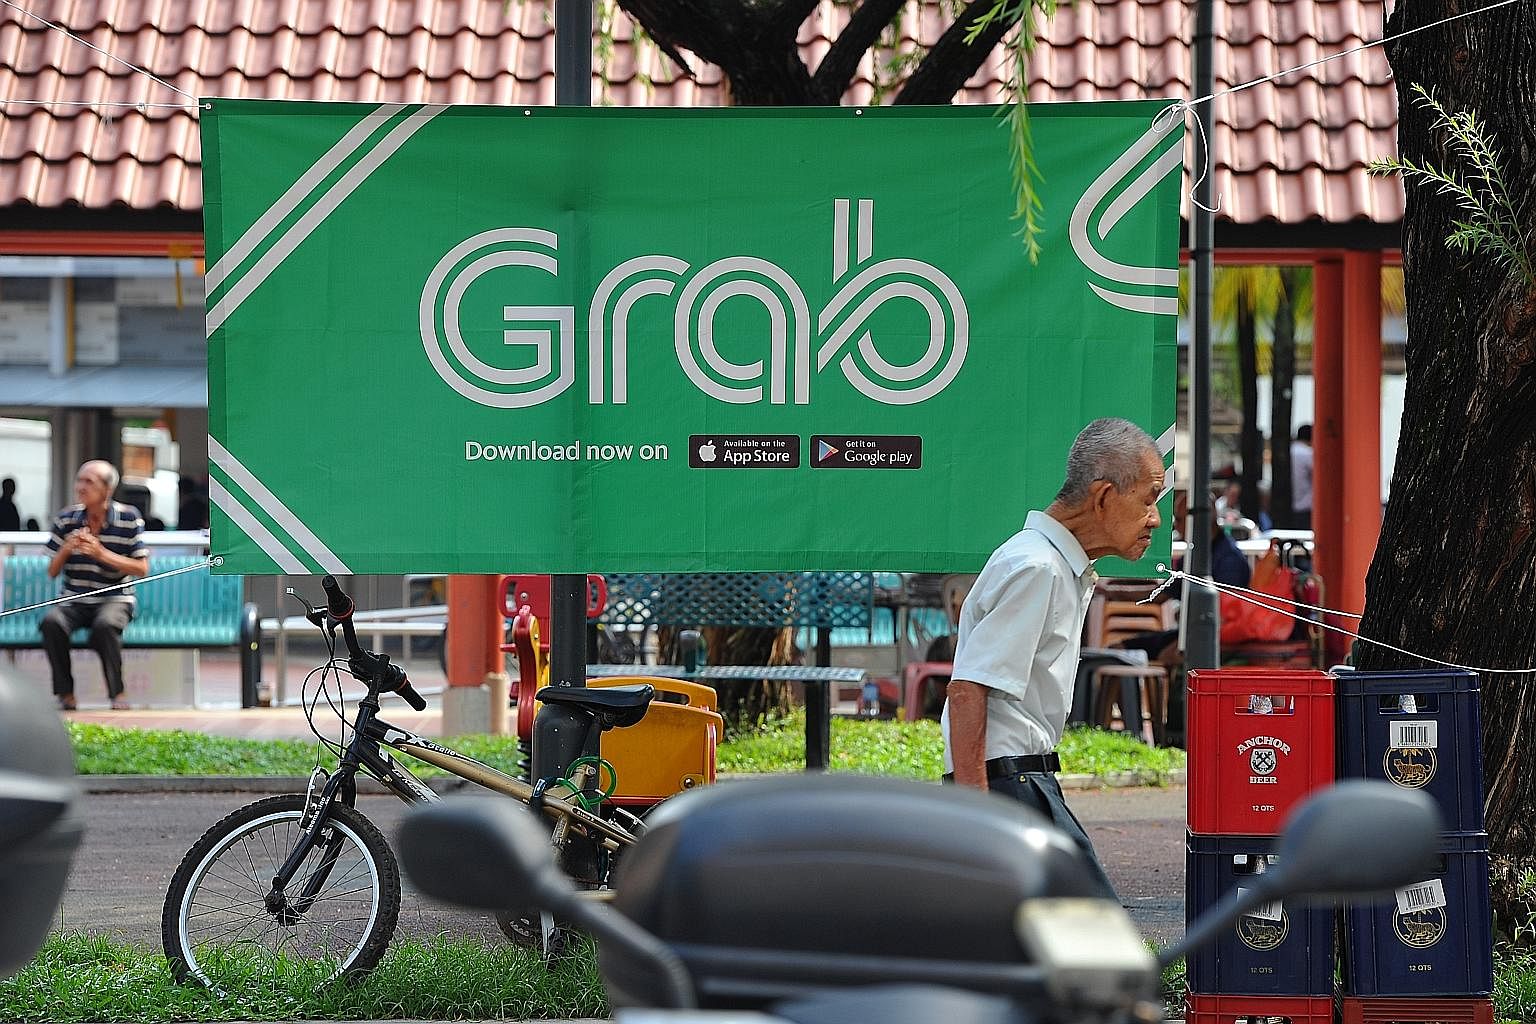 At the National Day Rally on Sunday night, Prime Minister Lee said the Government will refine rules governing ride-sharing apps like Uber and Grab to keep up with the times, adding that even disrupters like Uber and Grab will find themselves disrupte